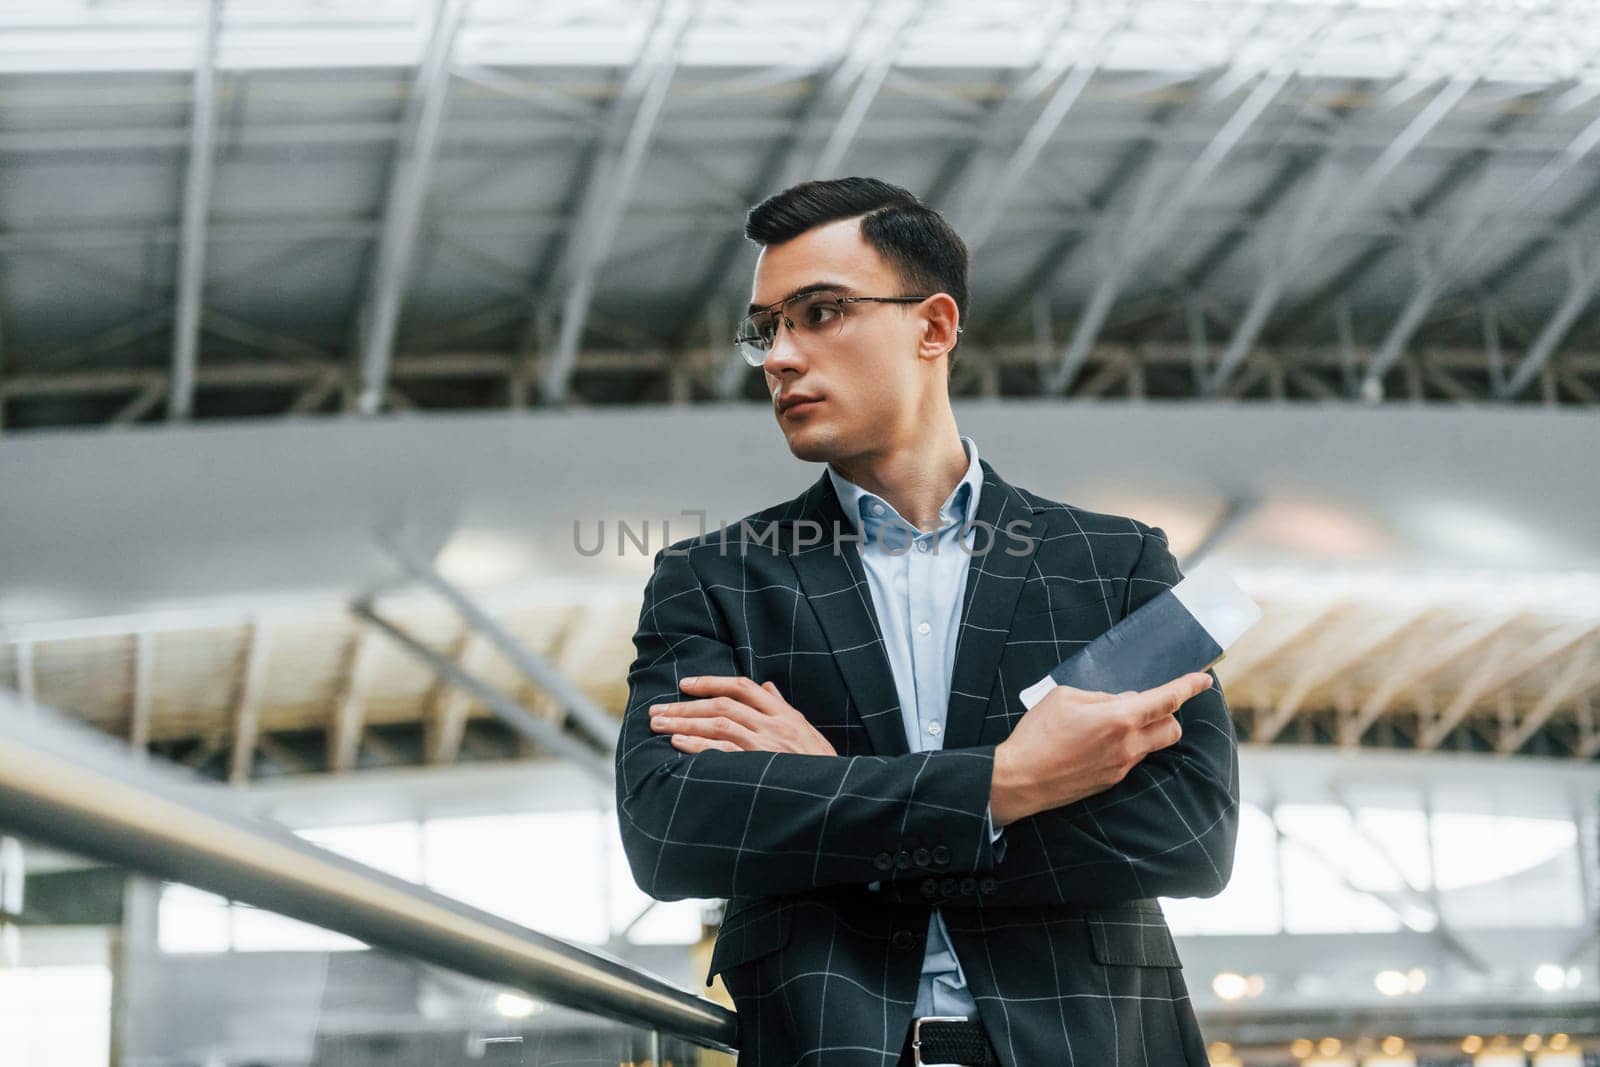 Serious look. Young businessman in formal clothes is in the airport at daytime.